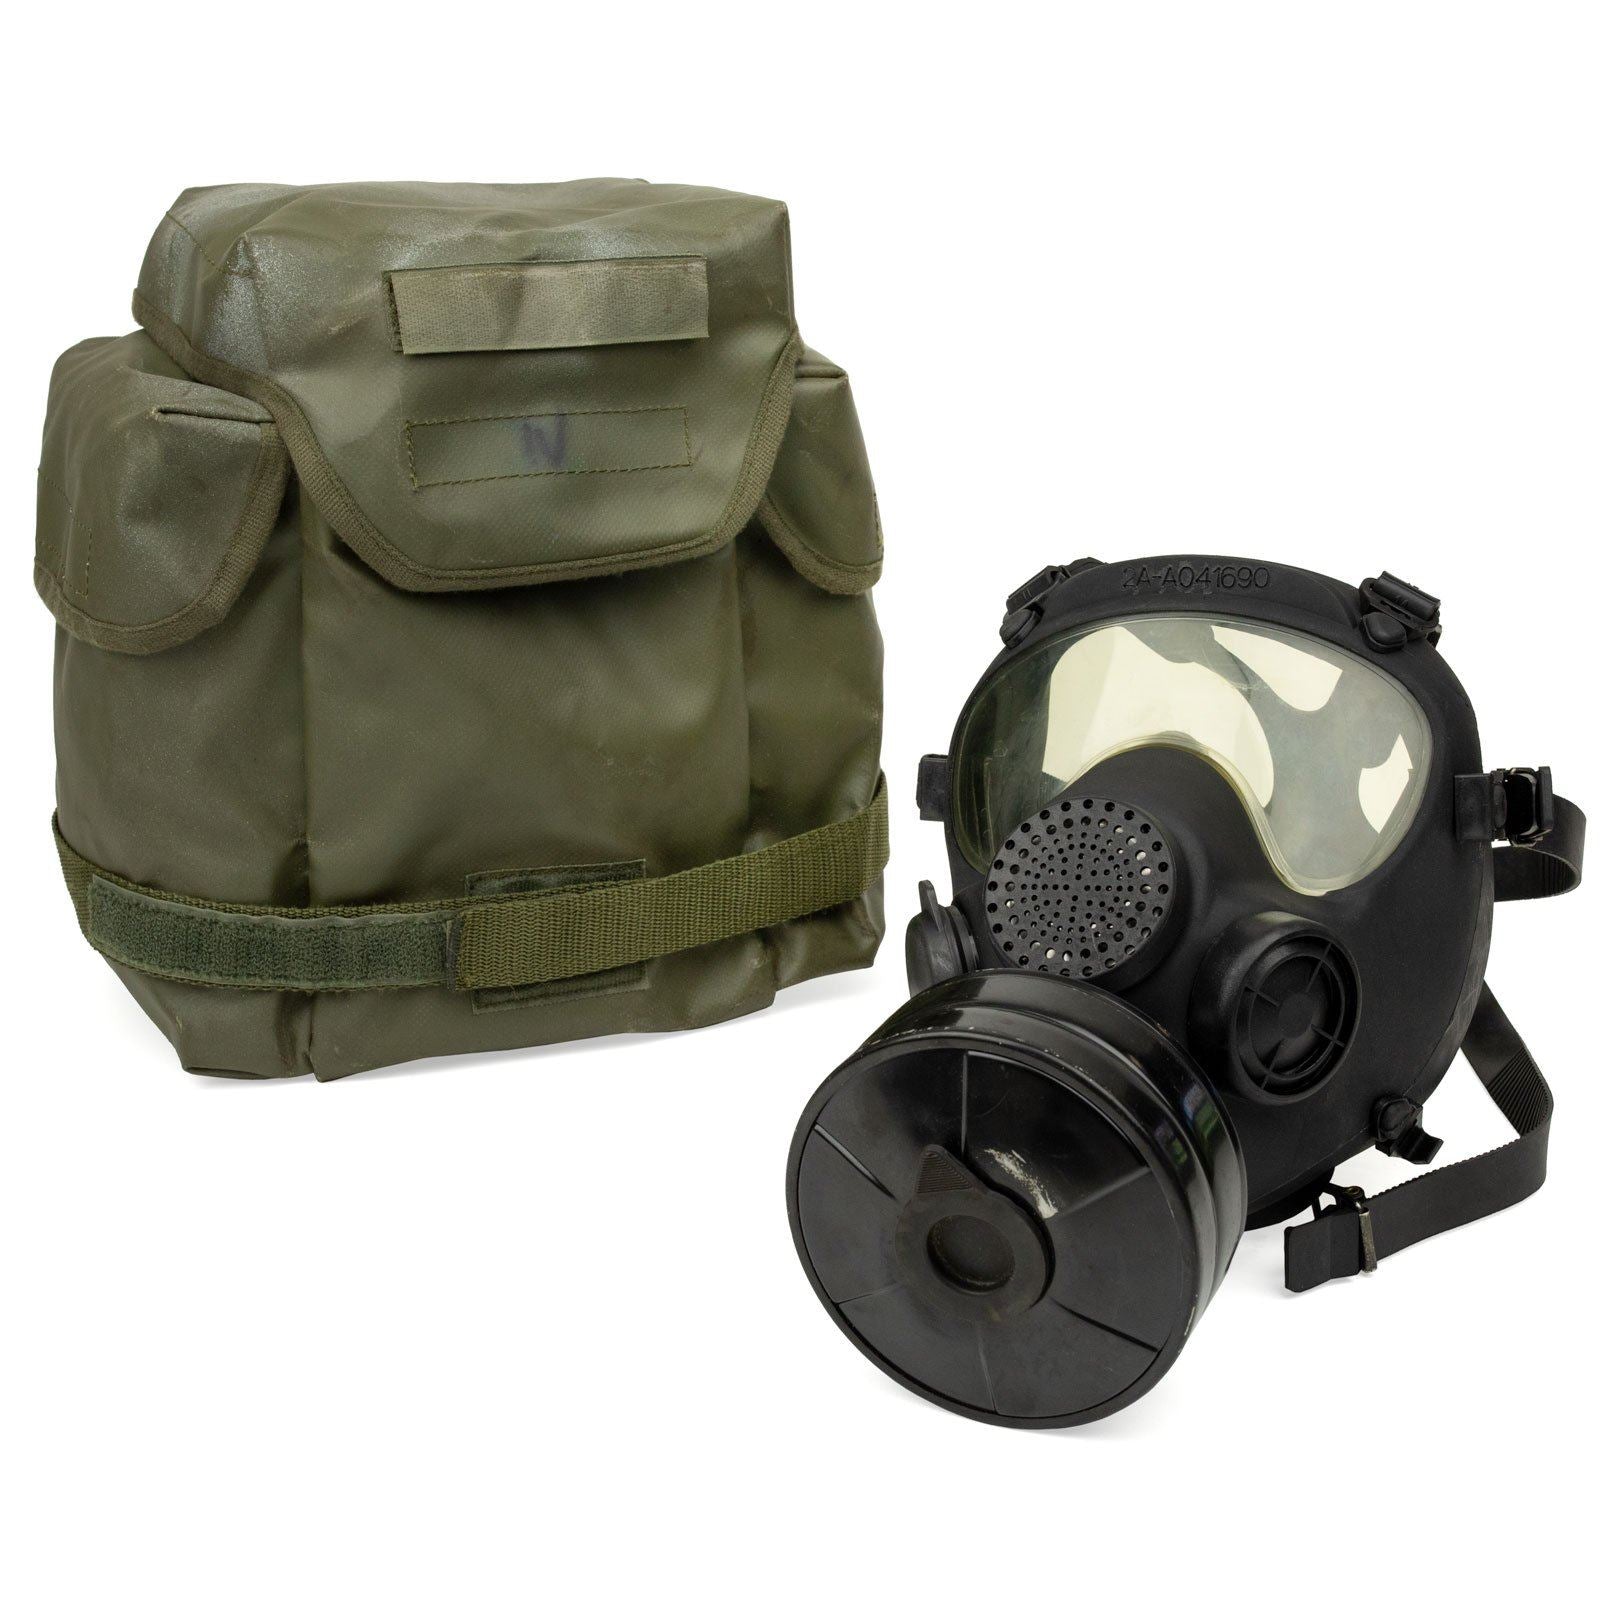 French ARF-A Gas Mask - Bag & Filter - Black, S/M